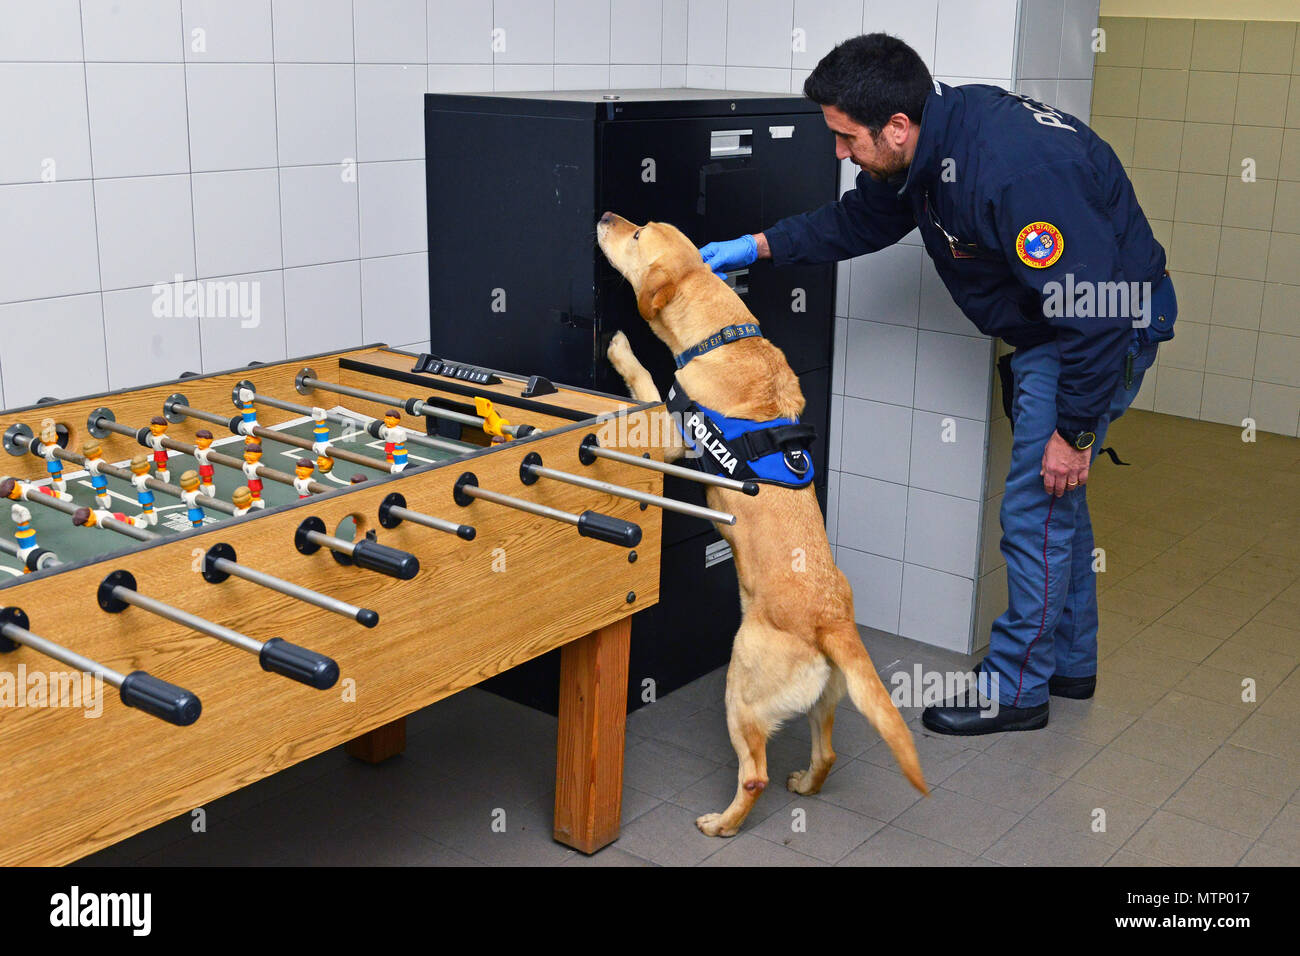 Italian military working dog Thunder and his handler Deputy Inspector Filippo Nicola, assigned to the Italian Police Squadra Cinofili K9 airport Venice, inspect areas that may have explosive residue at Caserma Ederle, Vicenza, Italy, Jan. 17, 2017. Military Working Dog teams are used in patrol, drug and explosive detection and specialized mission functions for the Department of Defense and other government agencies. The 525th Military Working Dog Detachment, joint training with Italian Police Squadra Cinofili K9 airport Venice and Questura di Padova and U.S. Air Force. (U.S. Army photo by Visu Stock Photo